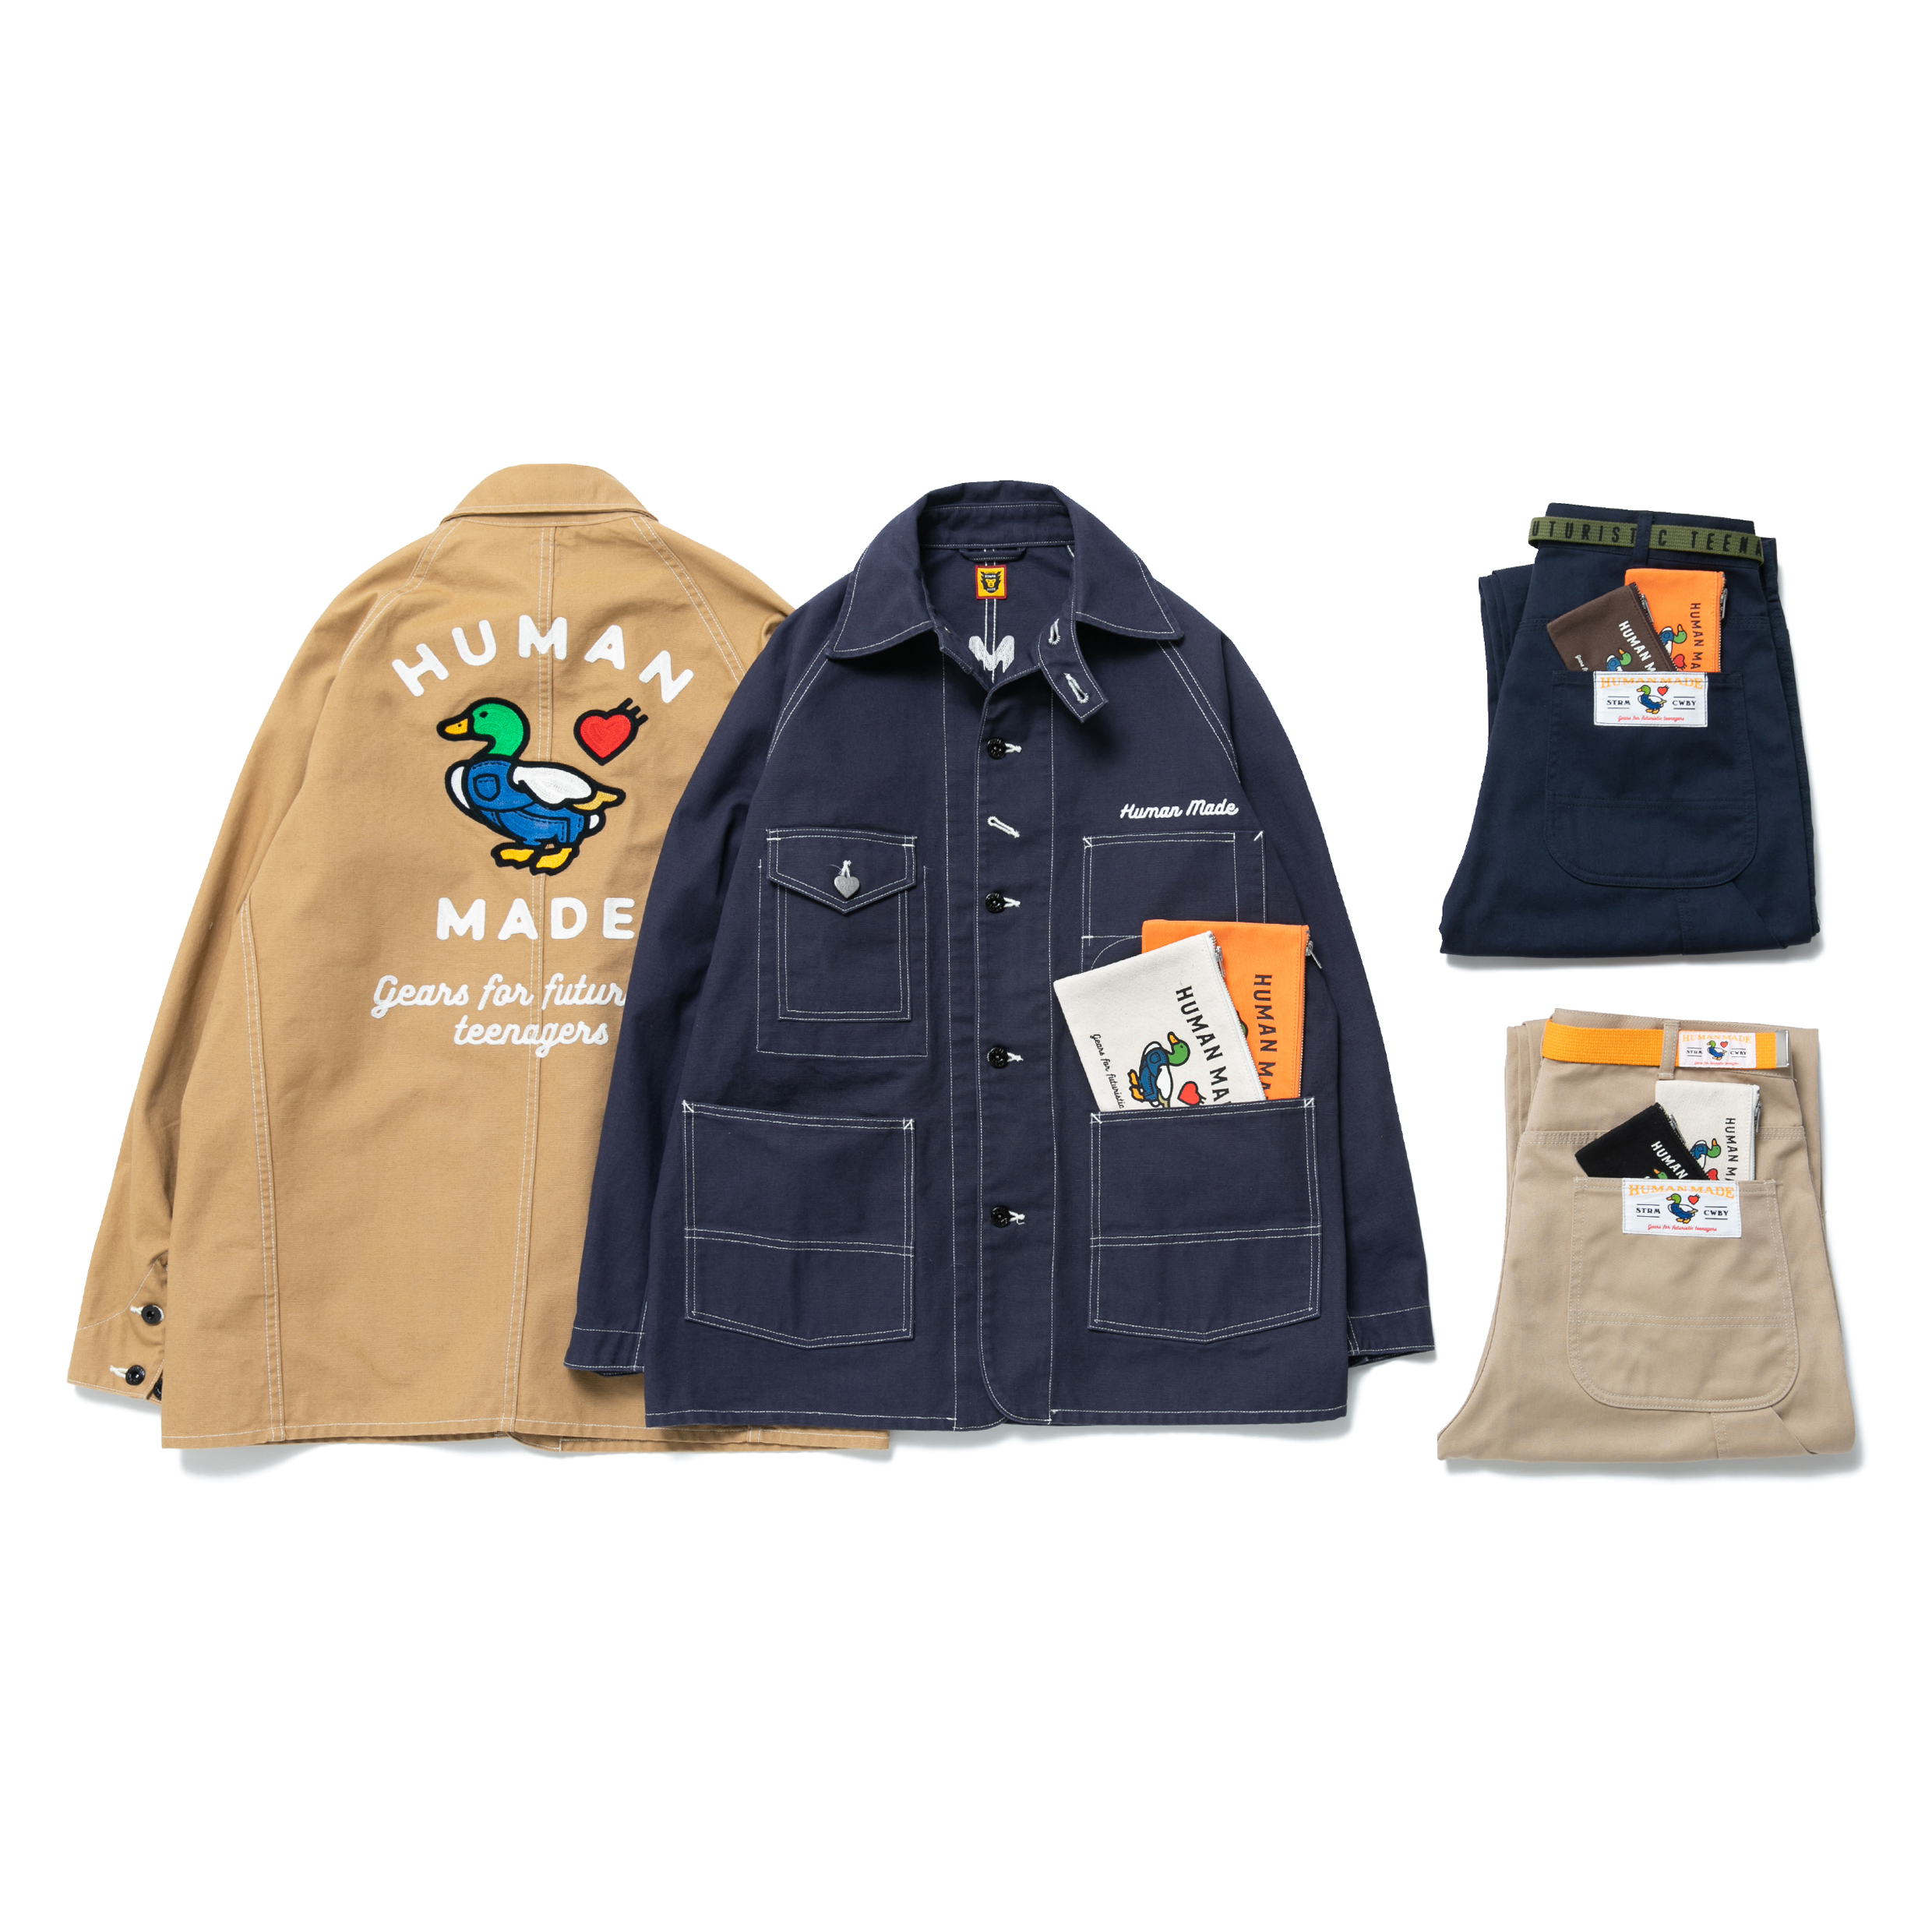 HUMAN MADE “WORK MADE” Capsule Collection